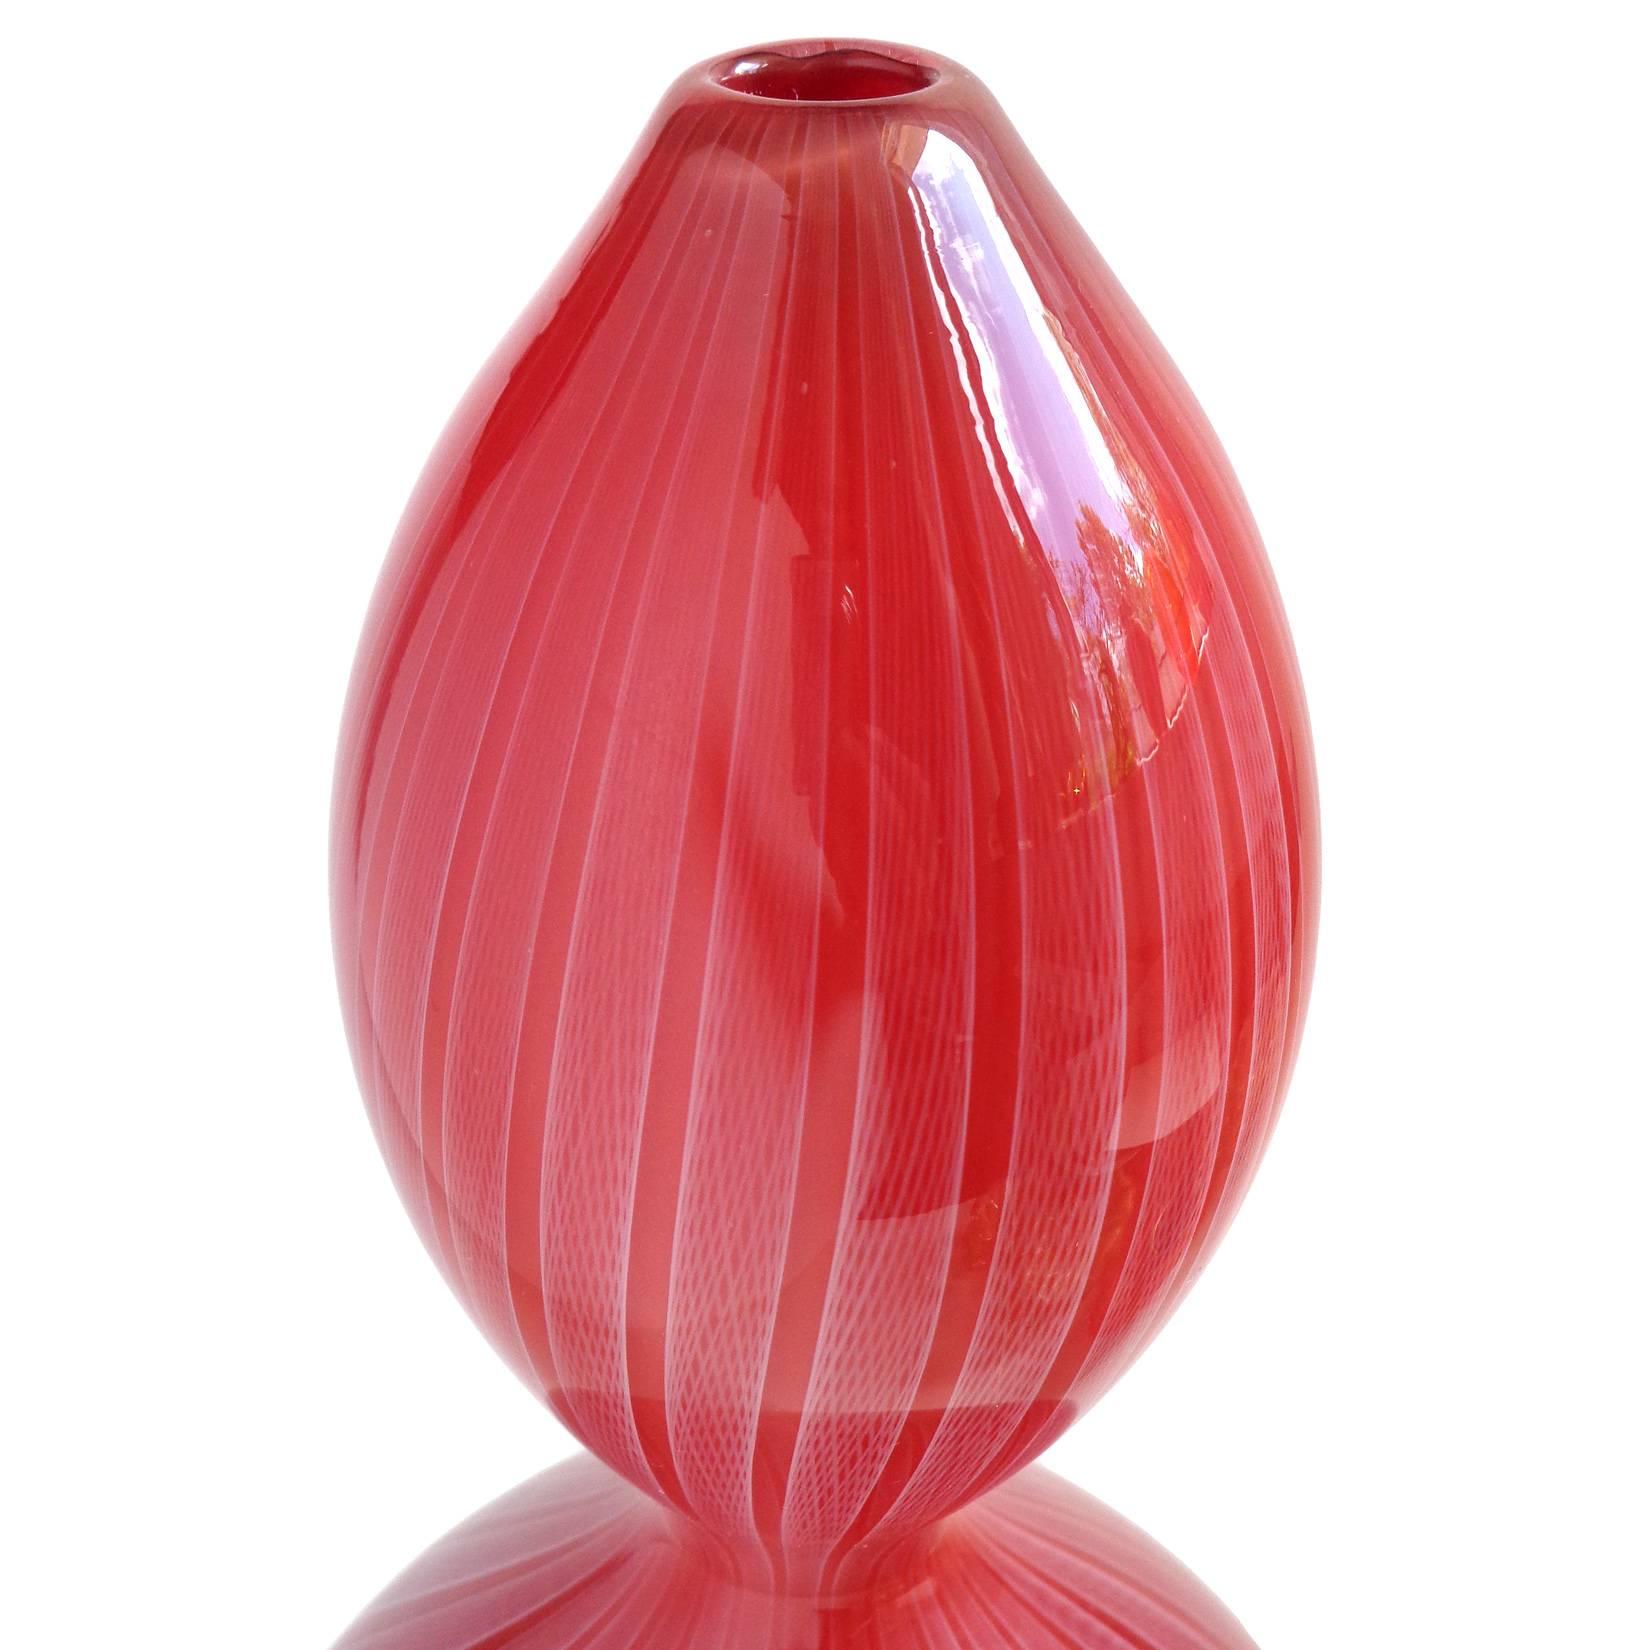 Gorgeous hand blown art glass Solifleur or Specimen gourd shaped flower vase, with Zanfirico net ribbons. The piece is signed Tom Biond (sp?) 2000. Created in the manner of Murano glass. Measures: 10 1/4" tall. 